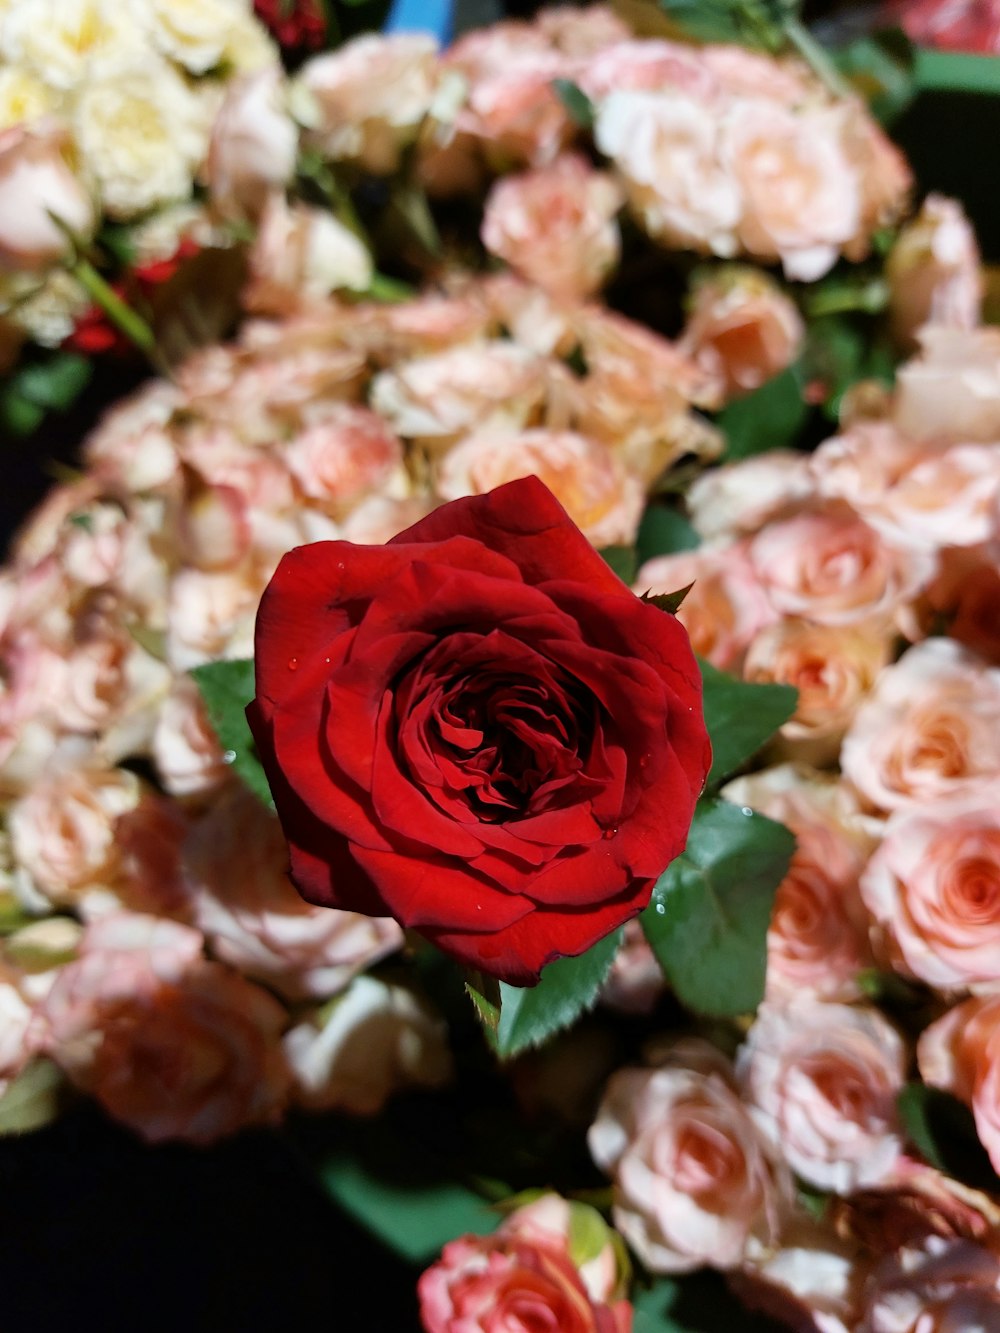 a red rose surrounded by white and pink flowers